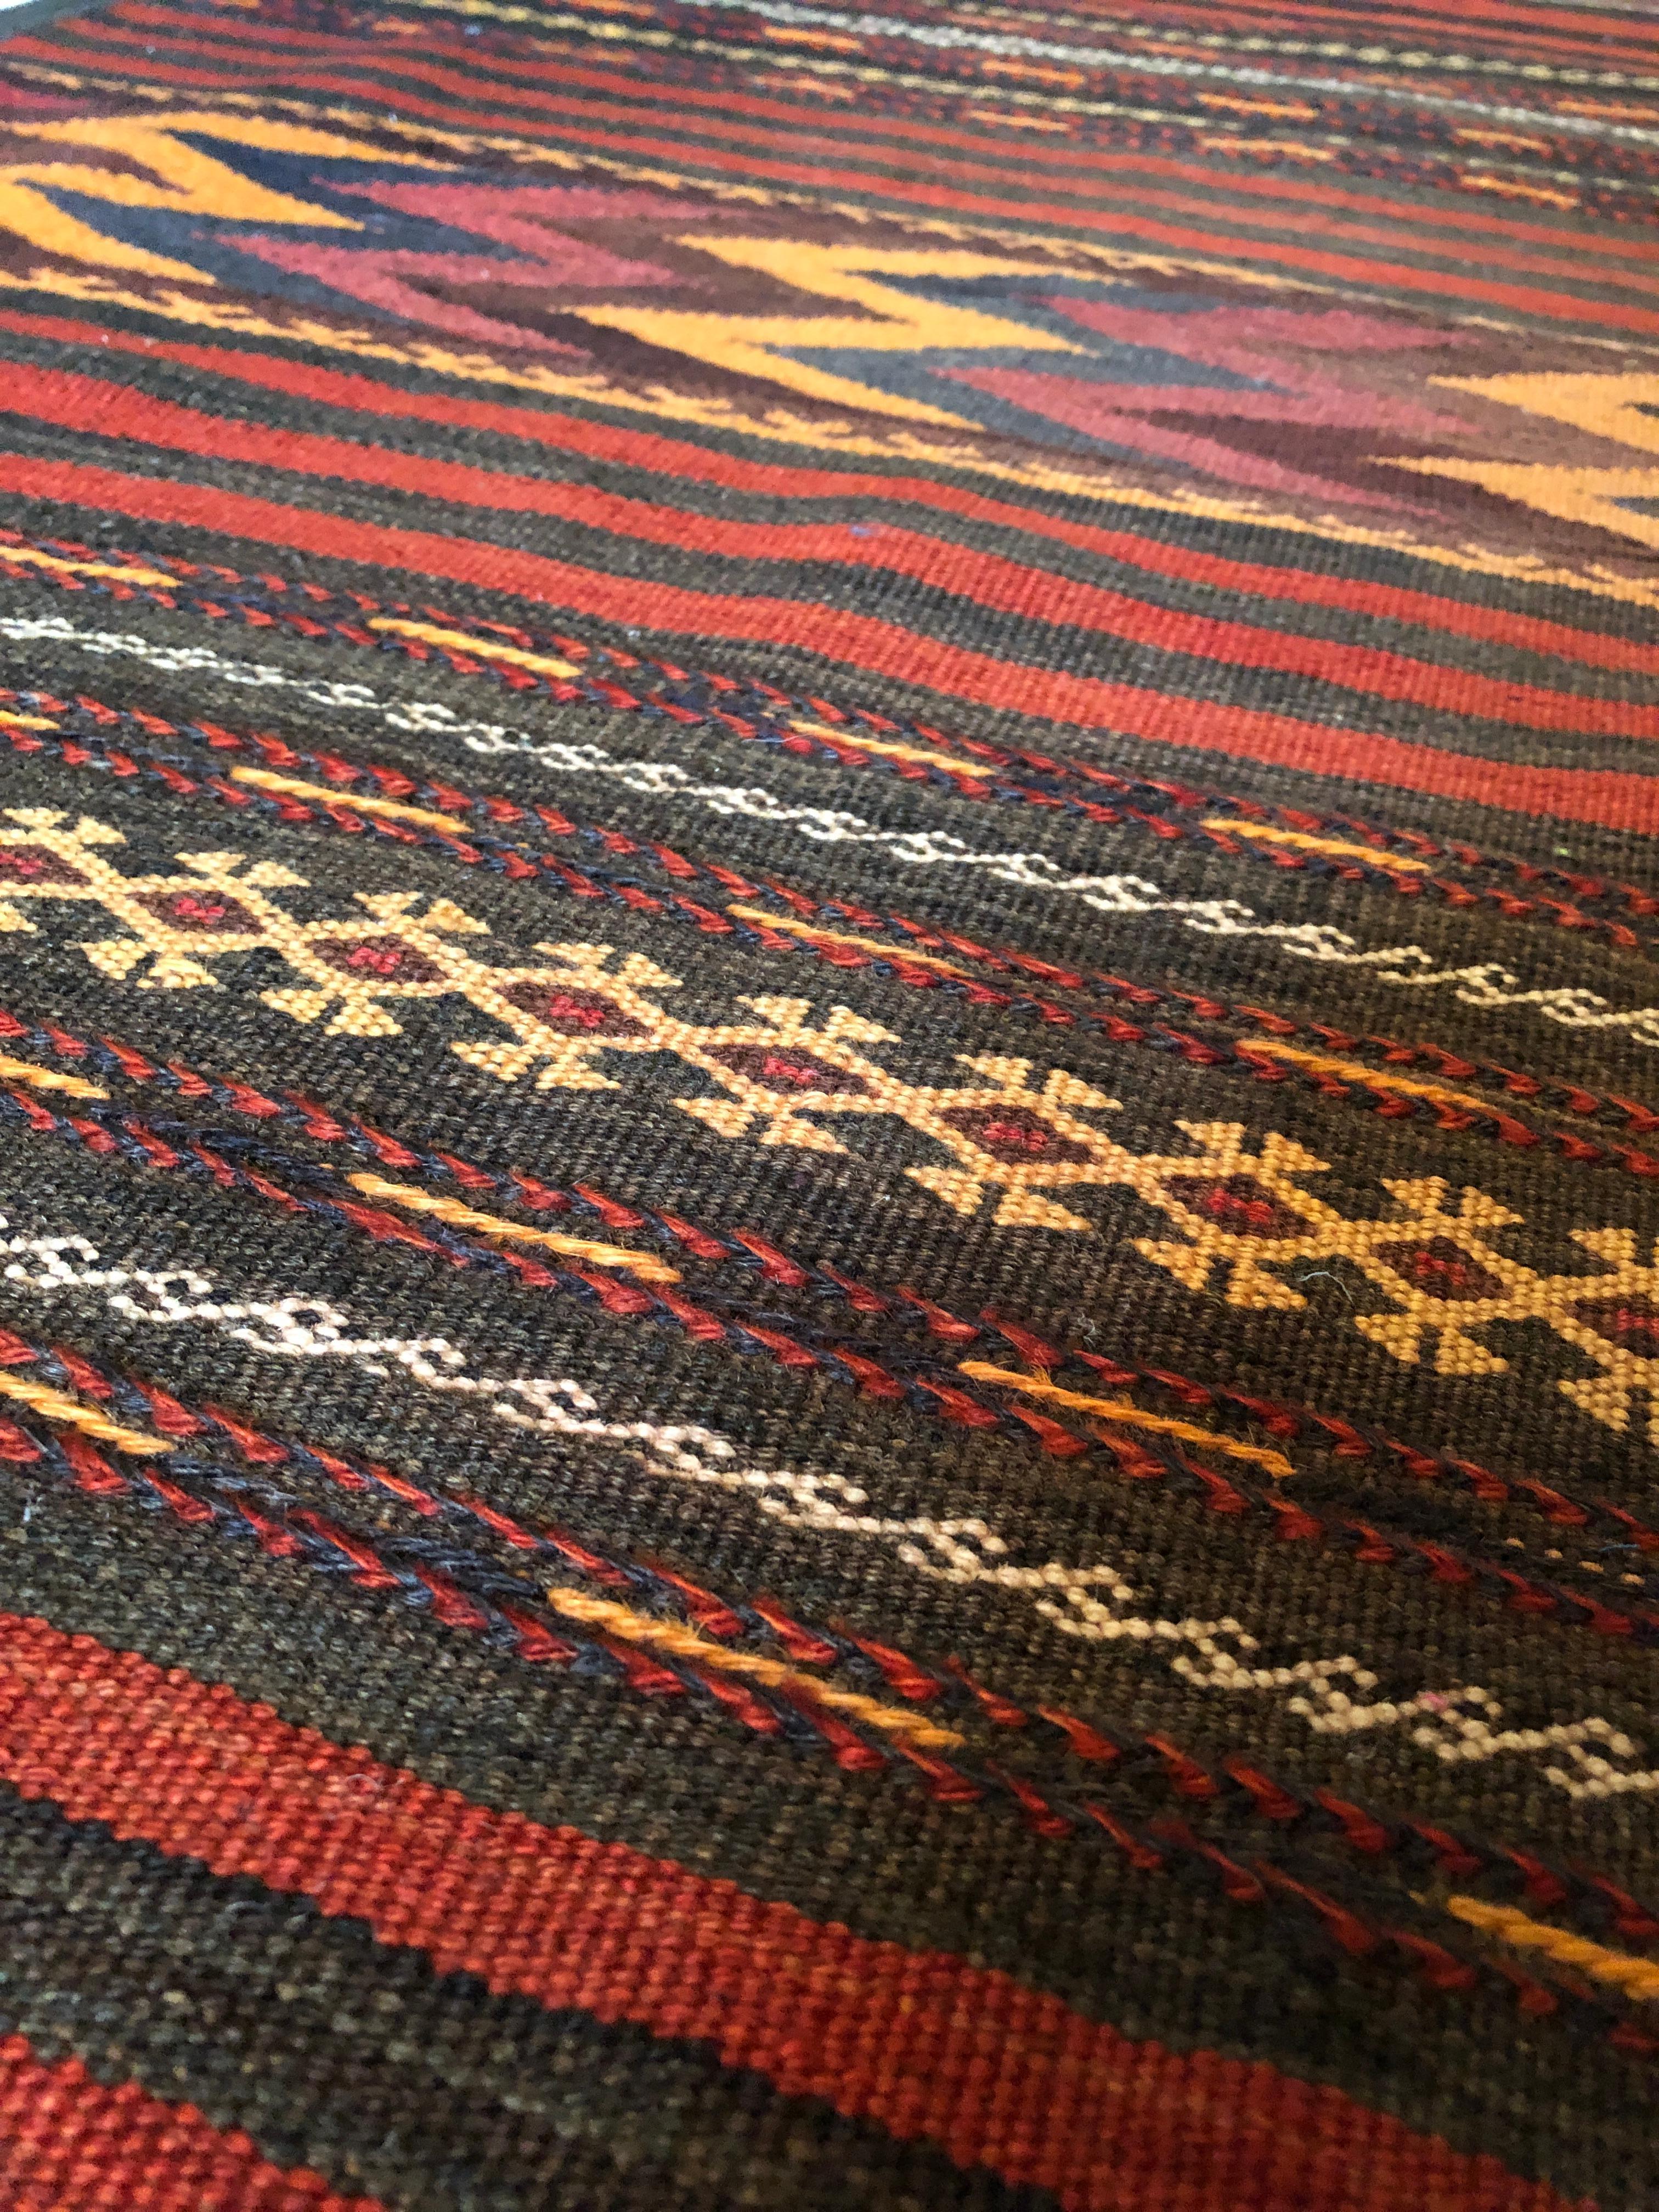 20th Century Vintage Wool Rug in Colorful Zigzag Pattern, Afghanistan Late 20th-Century